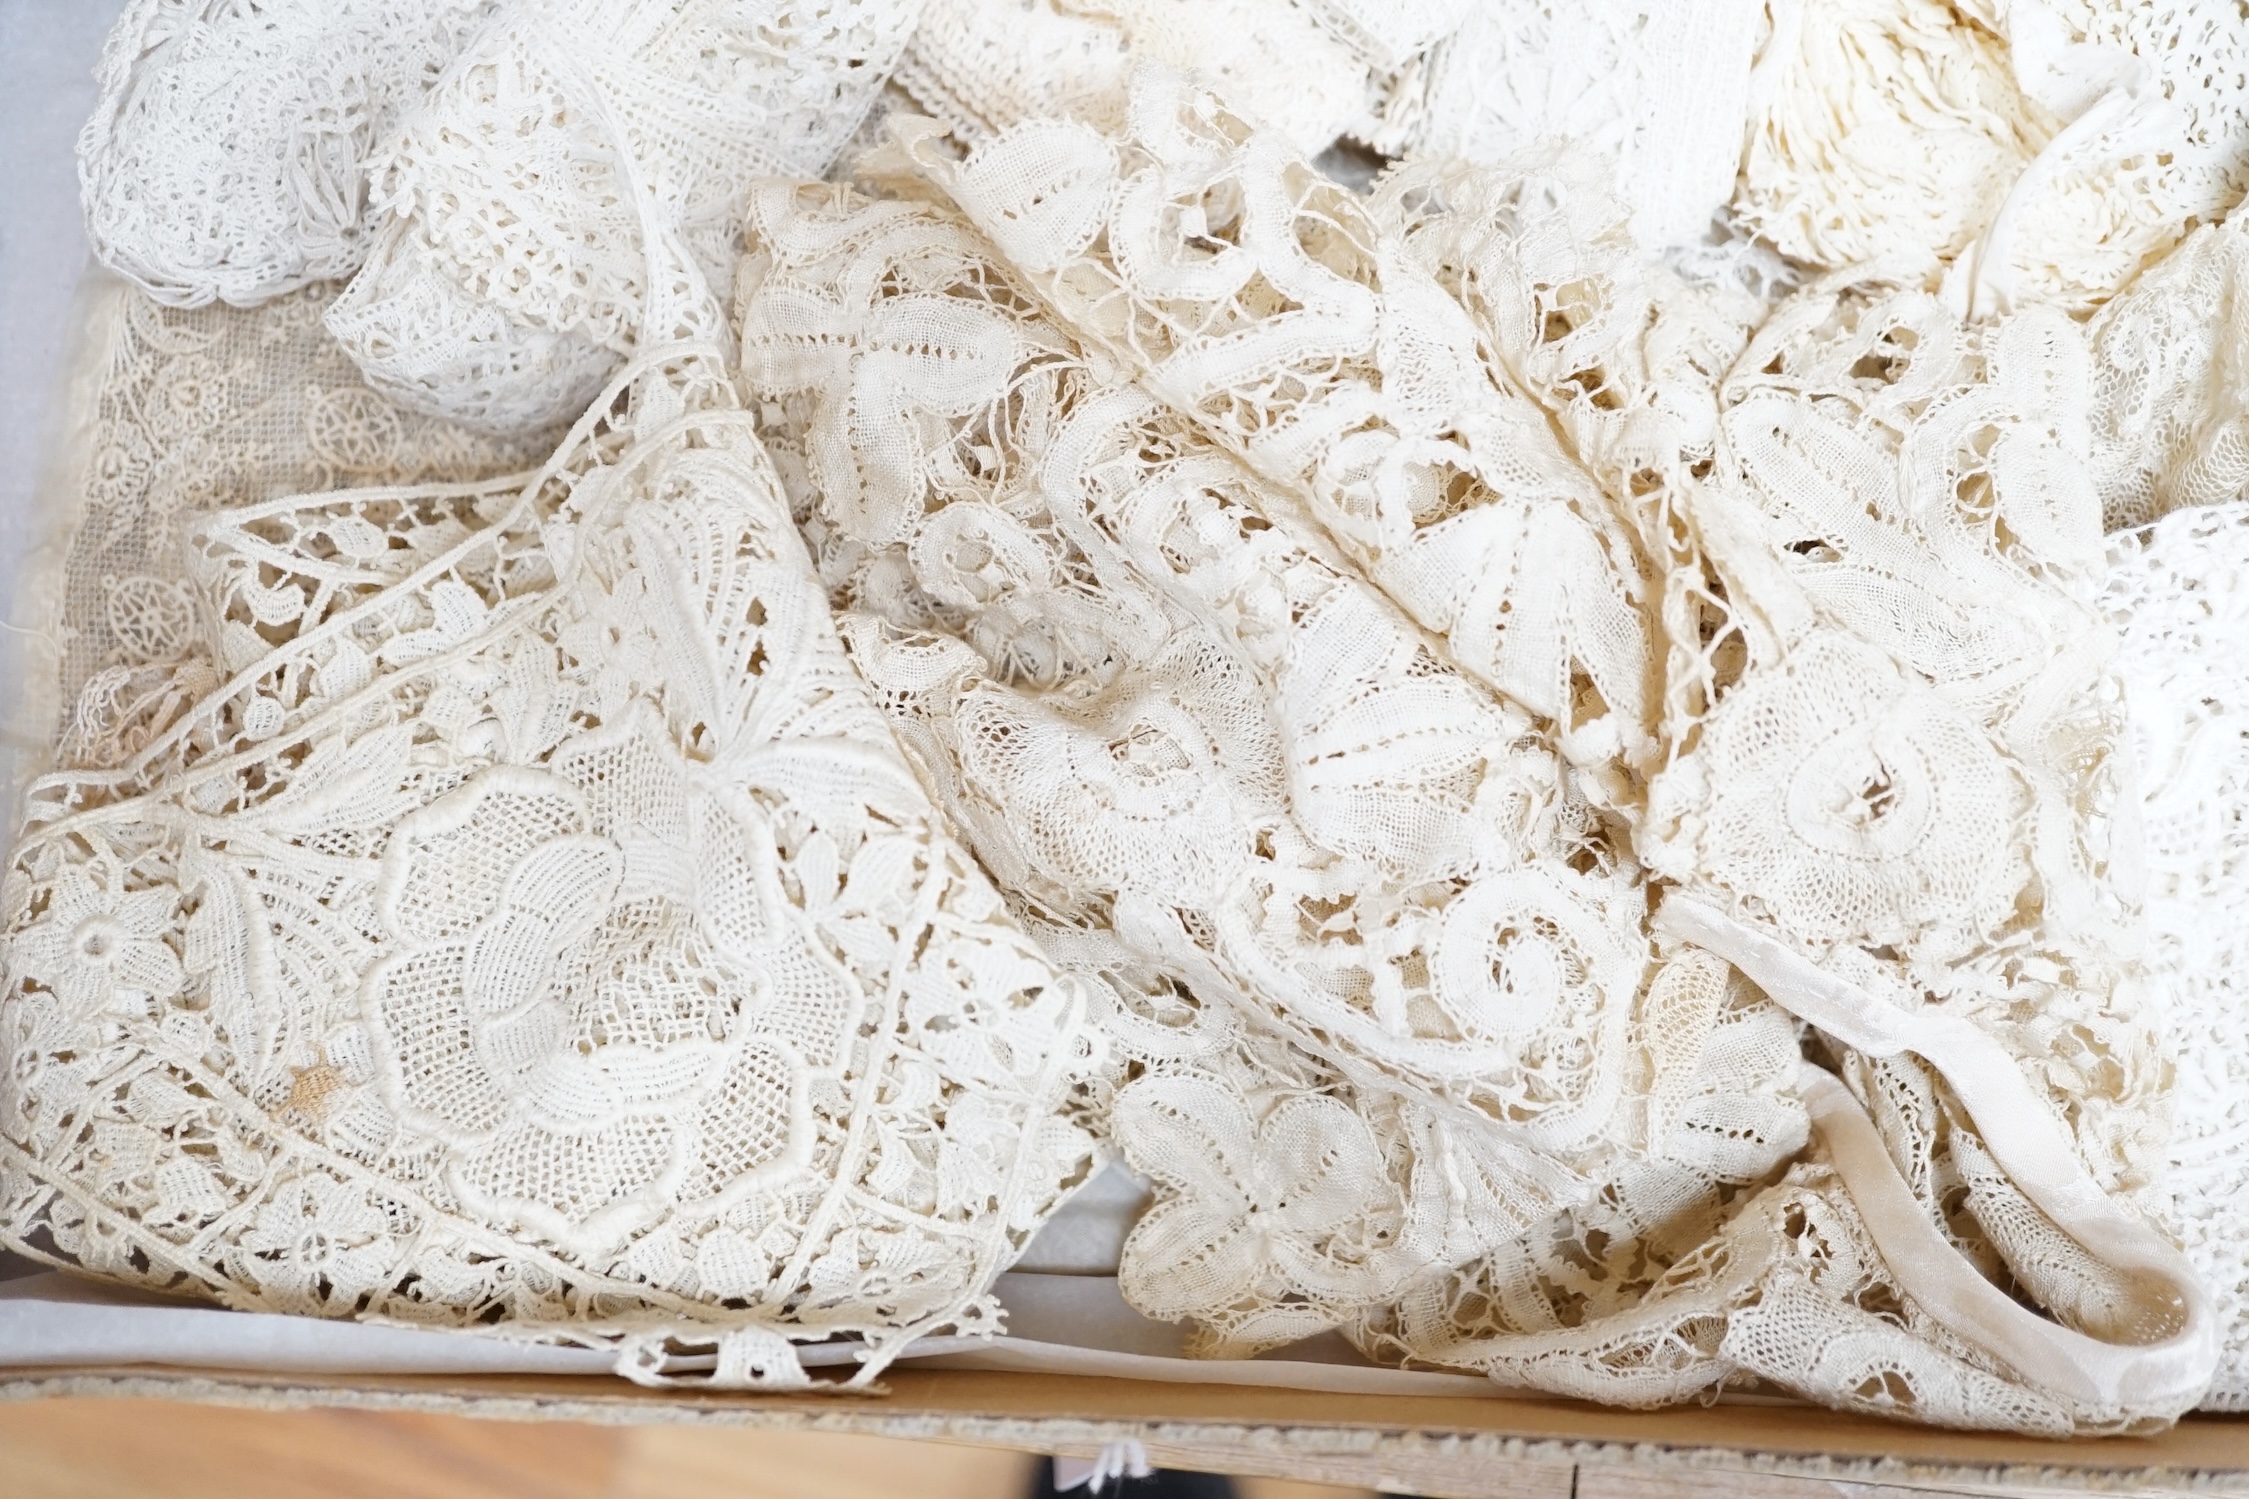 A collection of Honiton lace items, etc. - Image 2 of 4